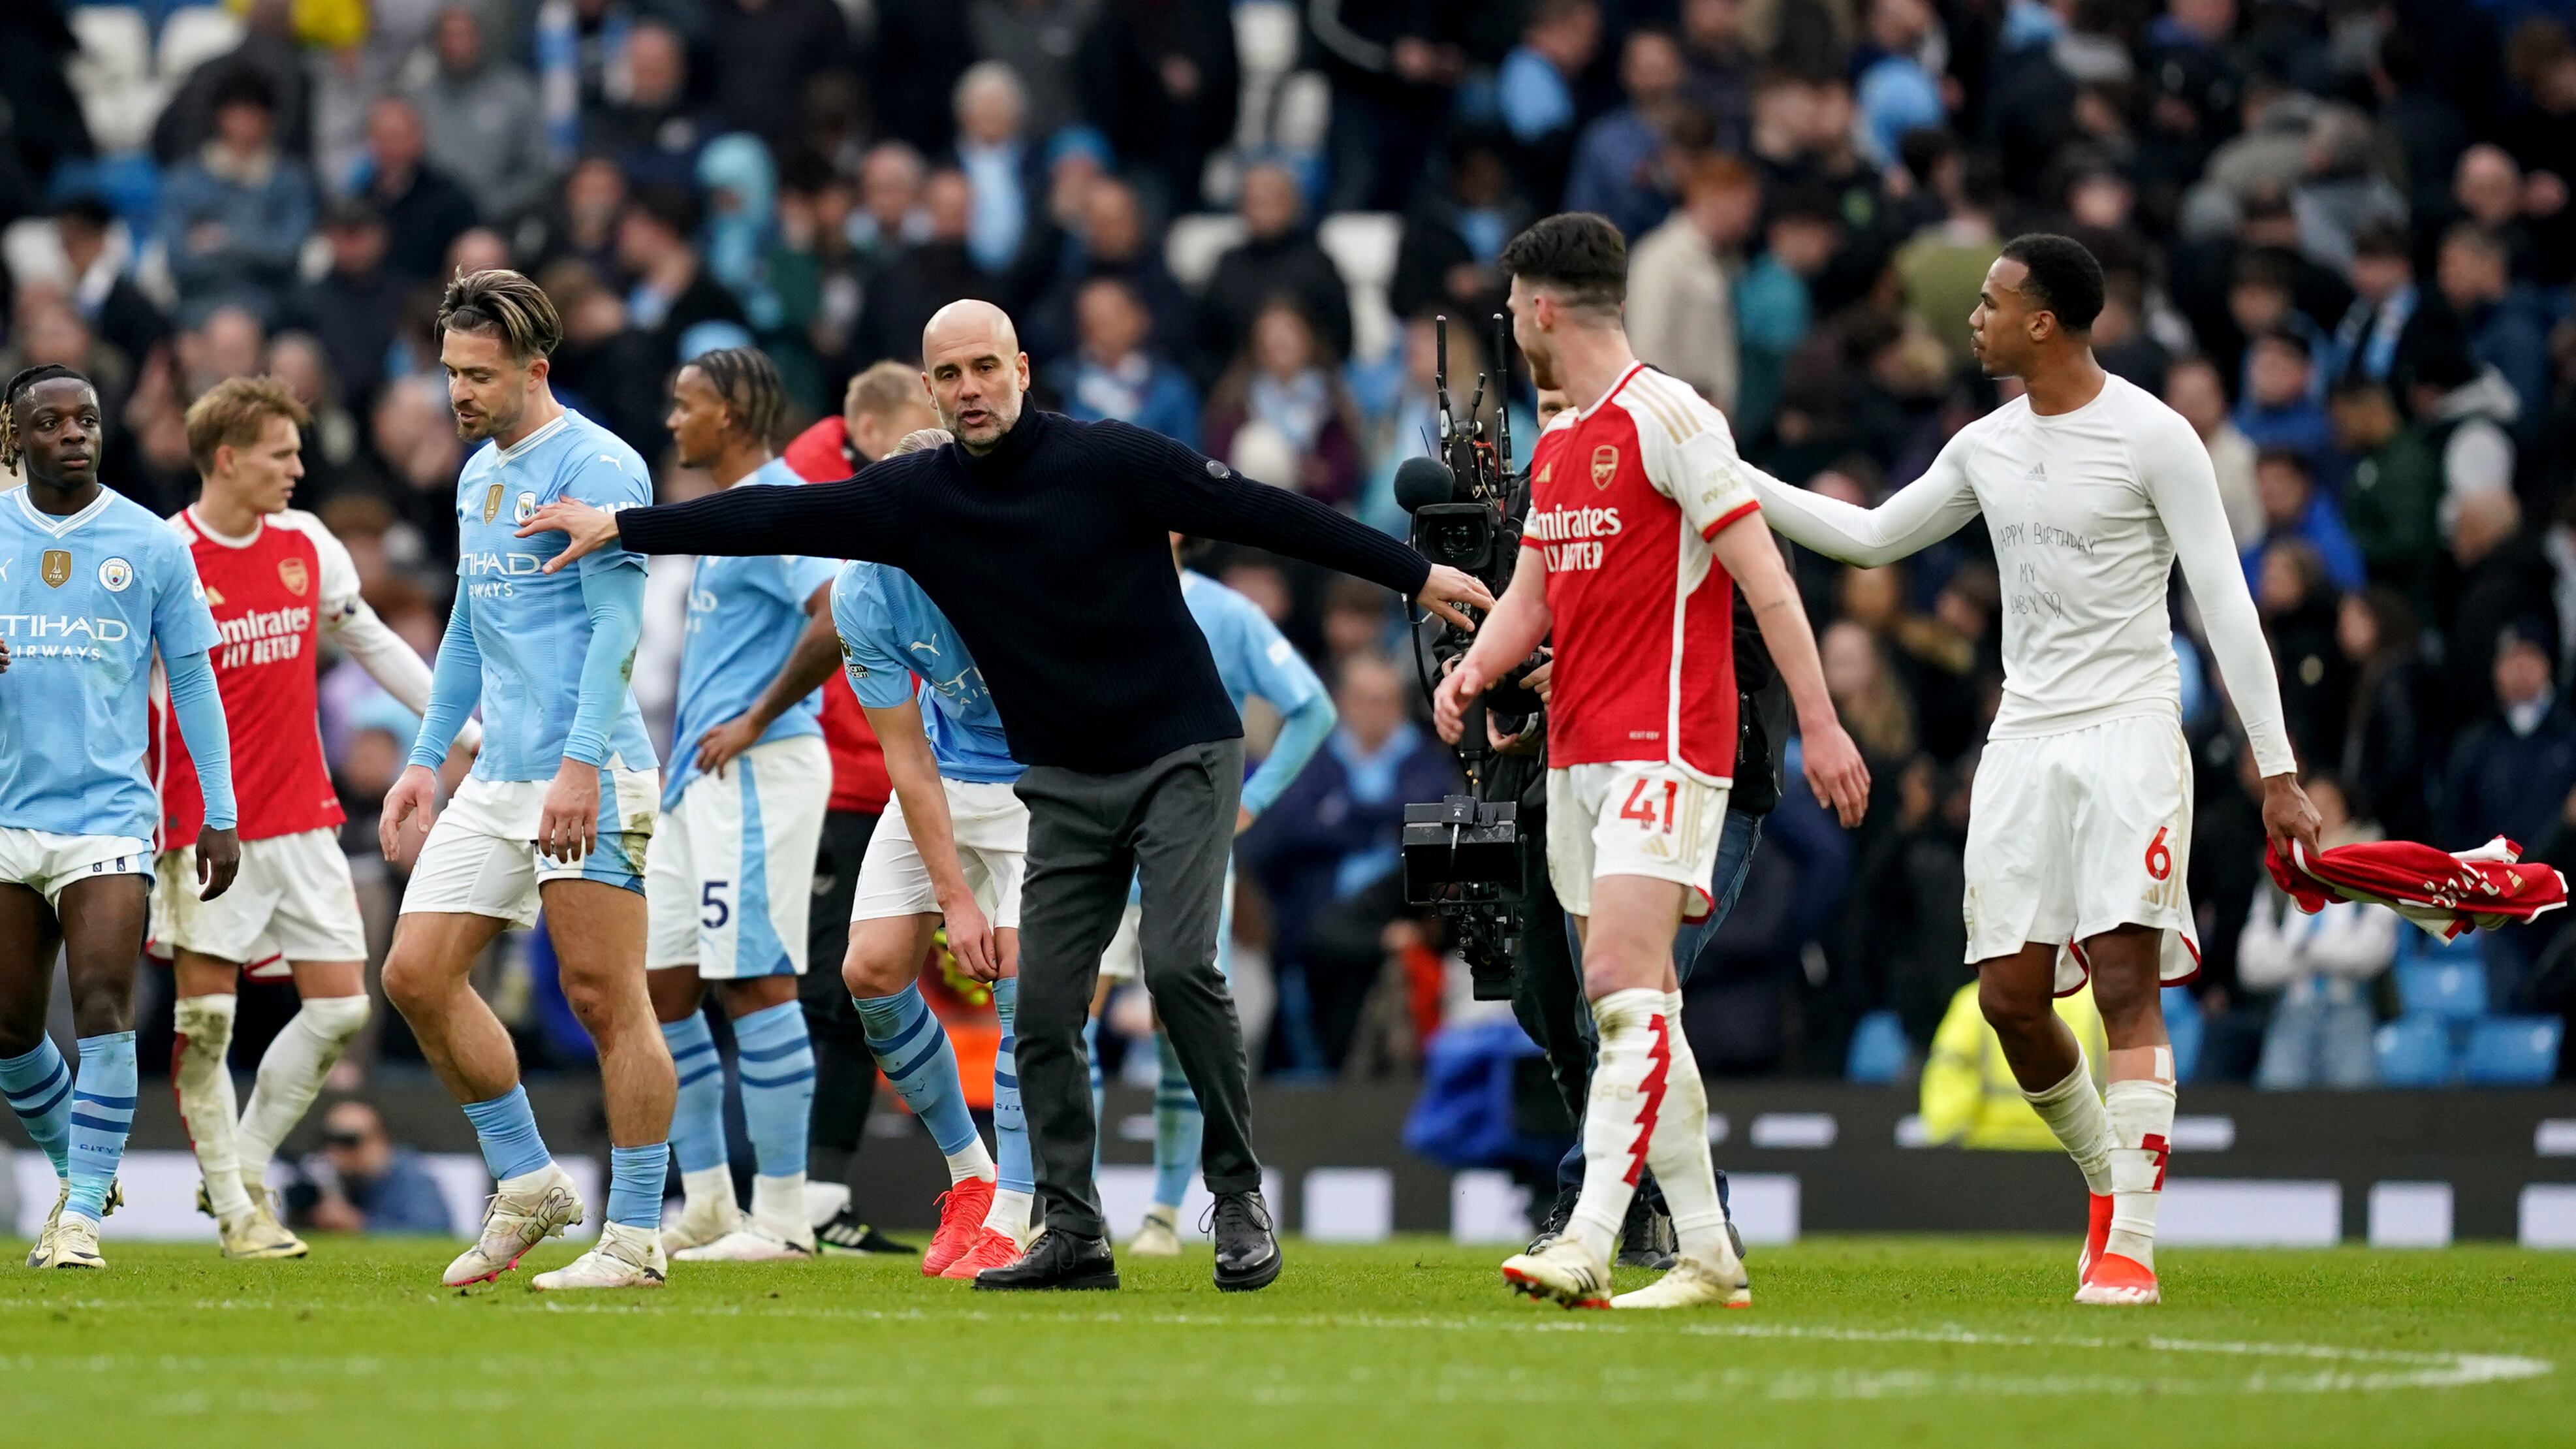 Manchester City’s manager Pep Guardiola after Sunday’s draw with Arsenal